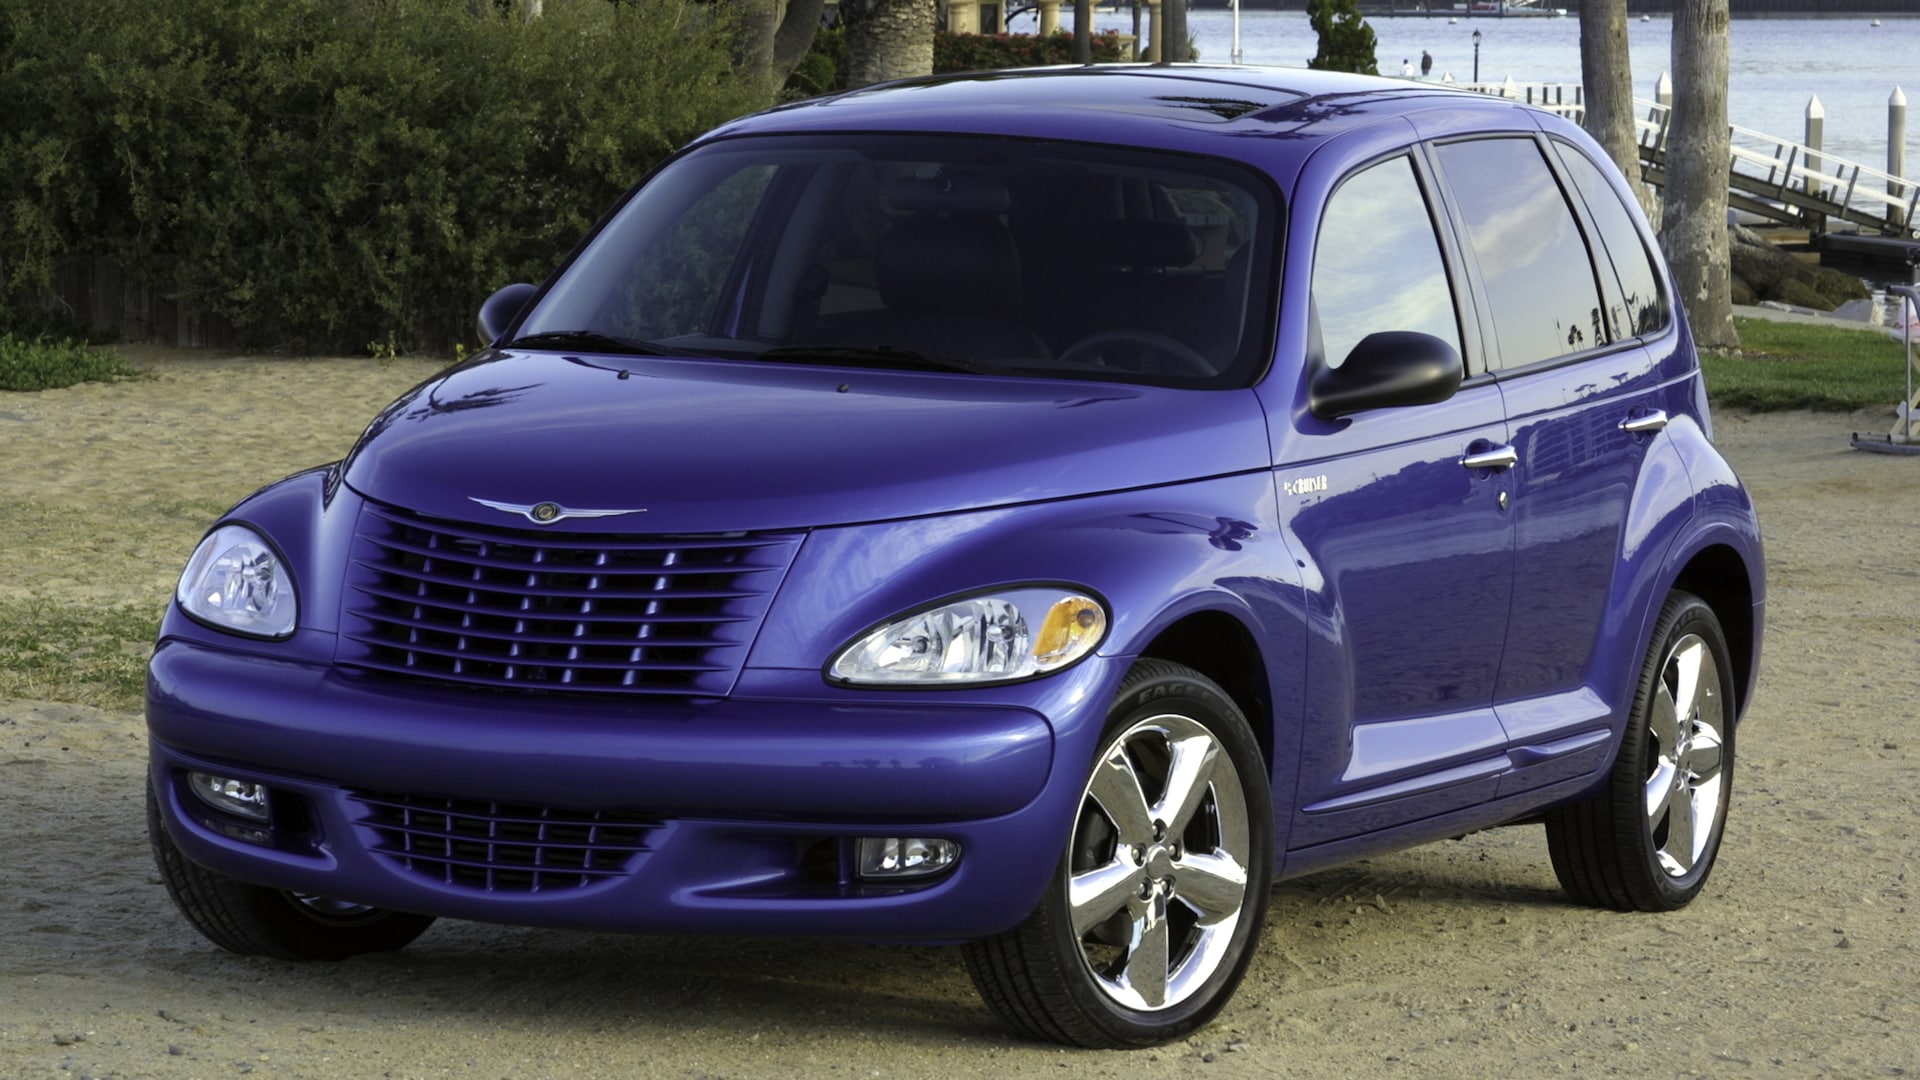 The Chrysler PT Cruiser: History, Buying Tips, Auctions, Photo, and More